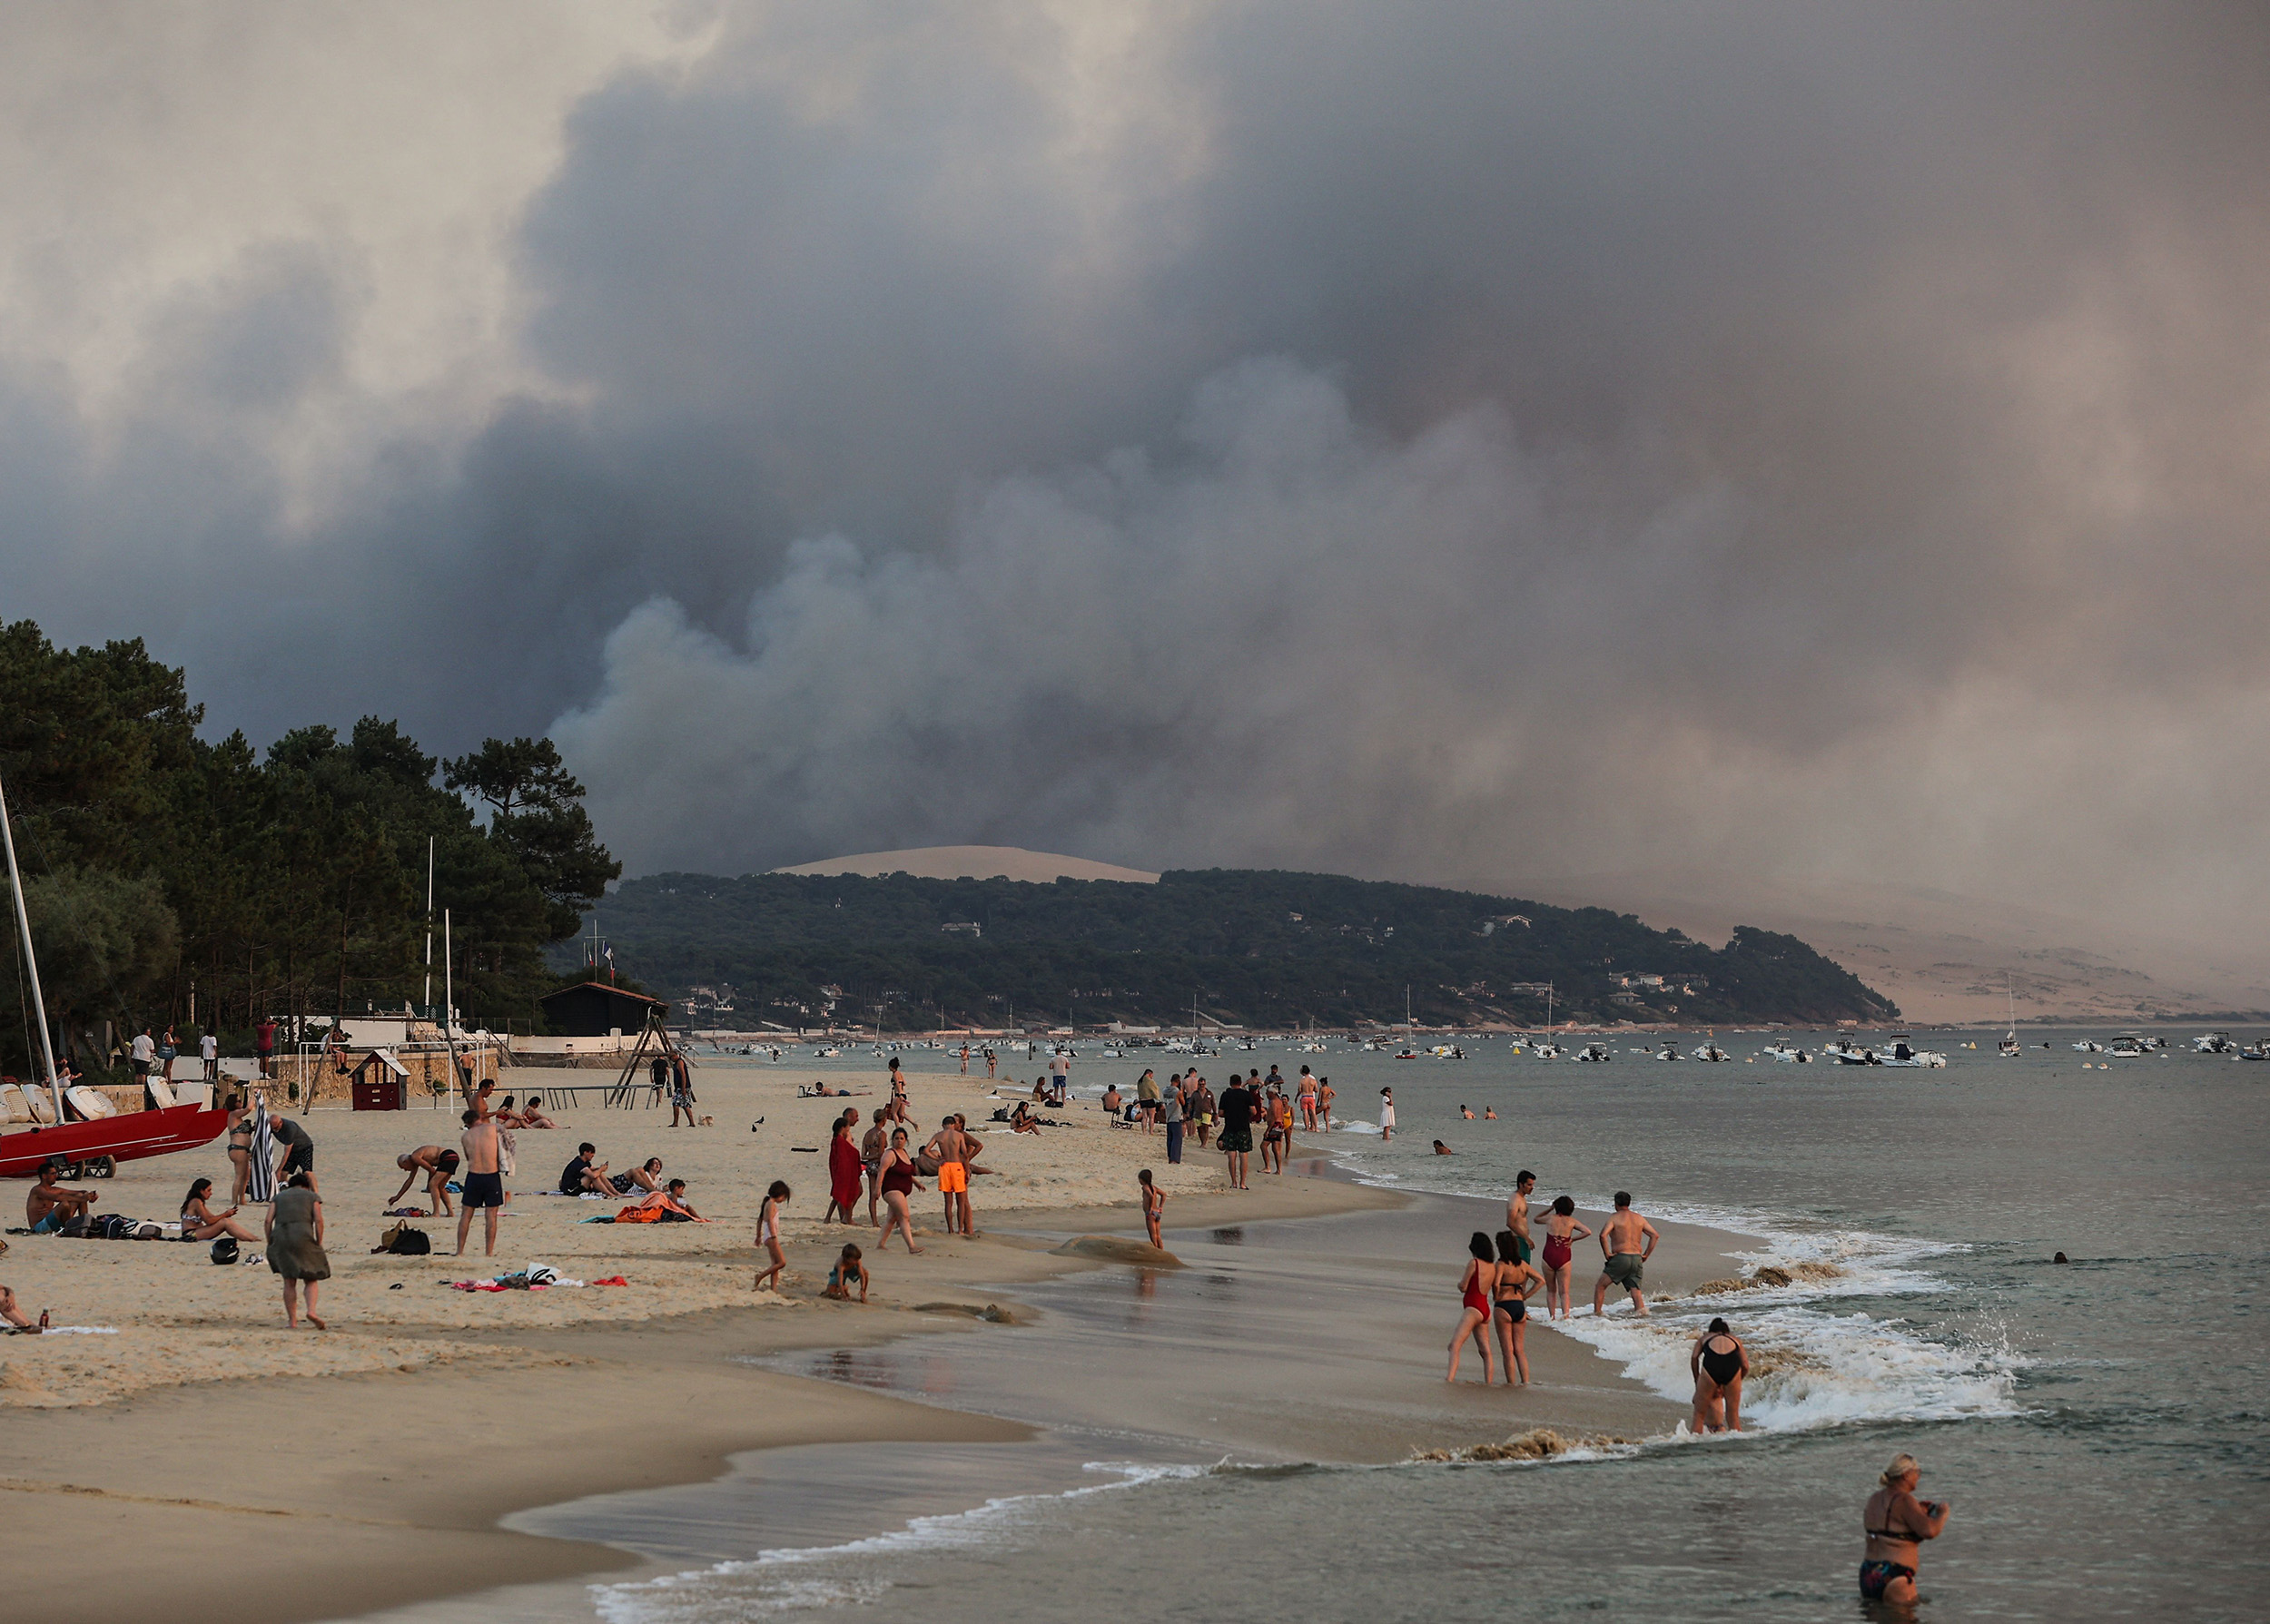 People gather at Moulleau beach as the smoke rises from the forest fire in La Teste-de-Buch, south west France, on July 18.